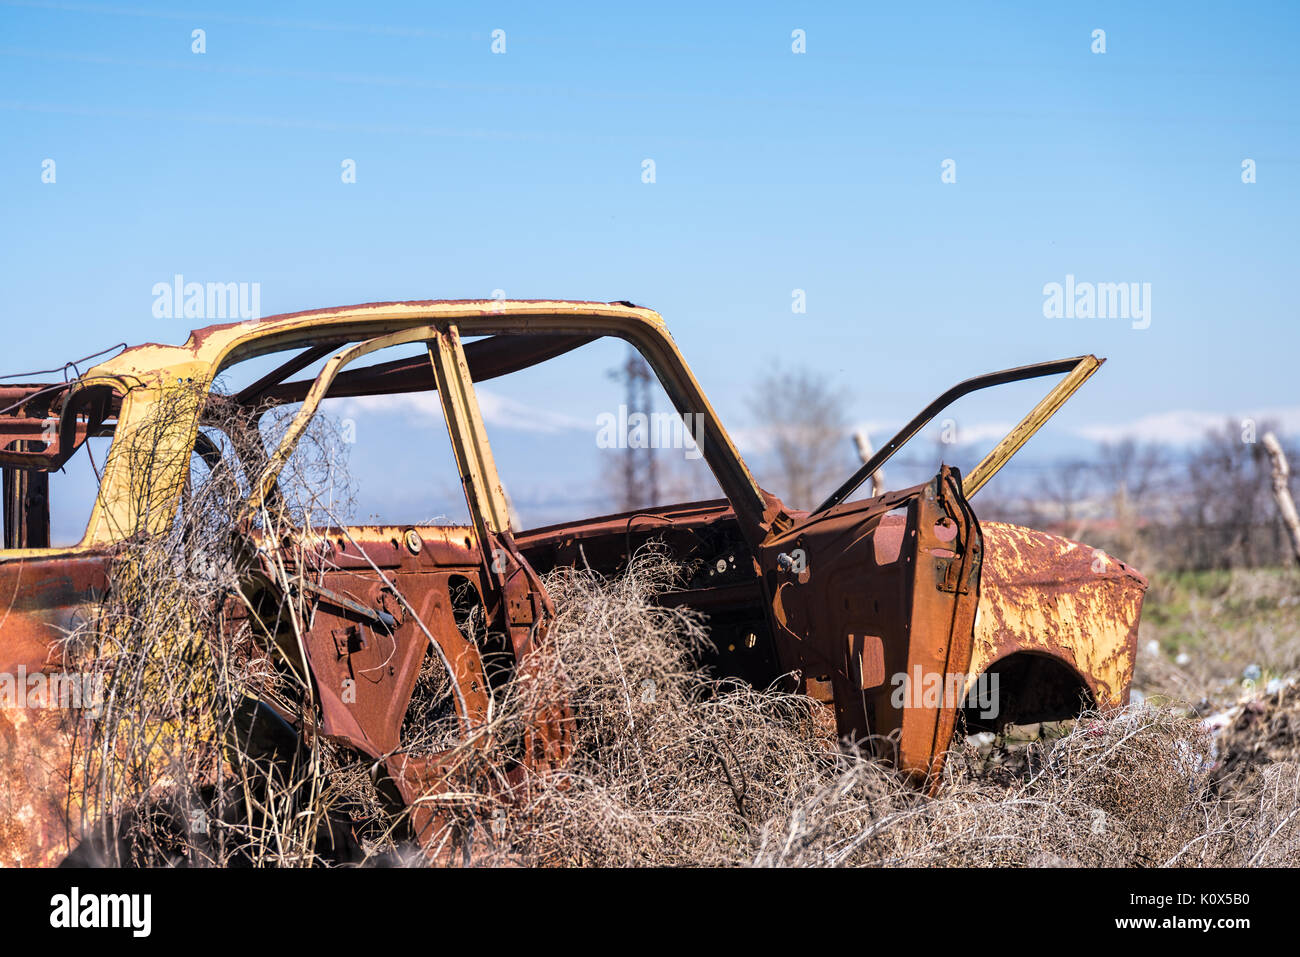 Abandoned and rusty wreckage of an yellow vintage Soviet Russian car in the middle of dry hay with scenic ice top mountains in Southern Armenia. Stock Photo